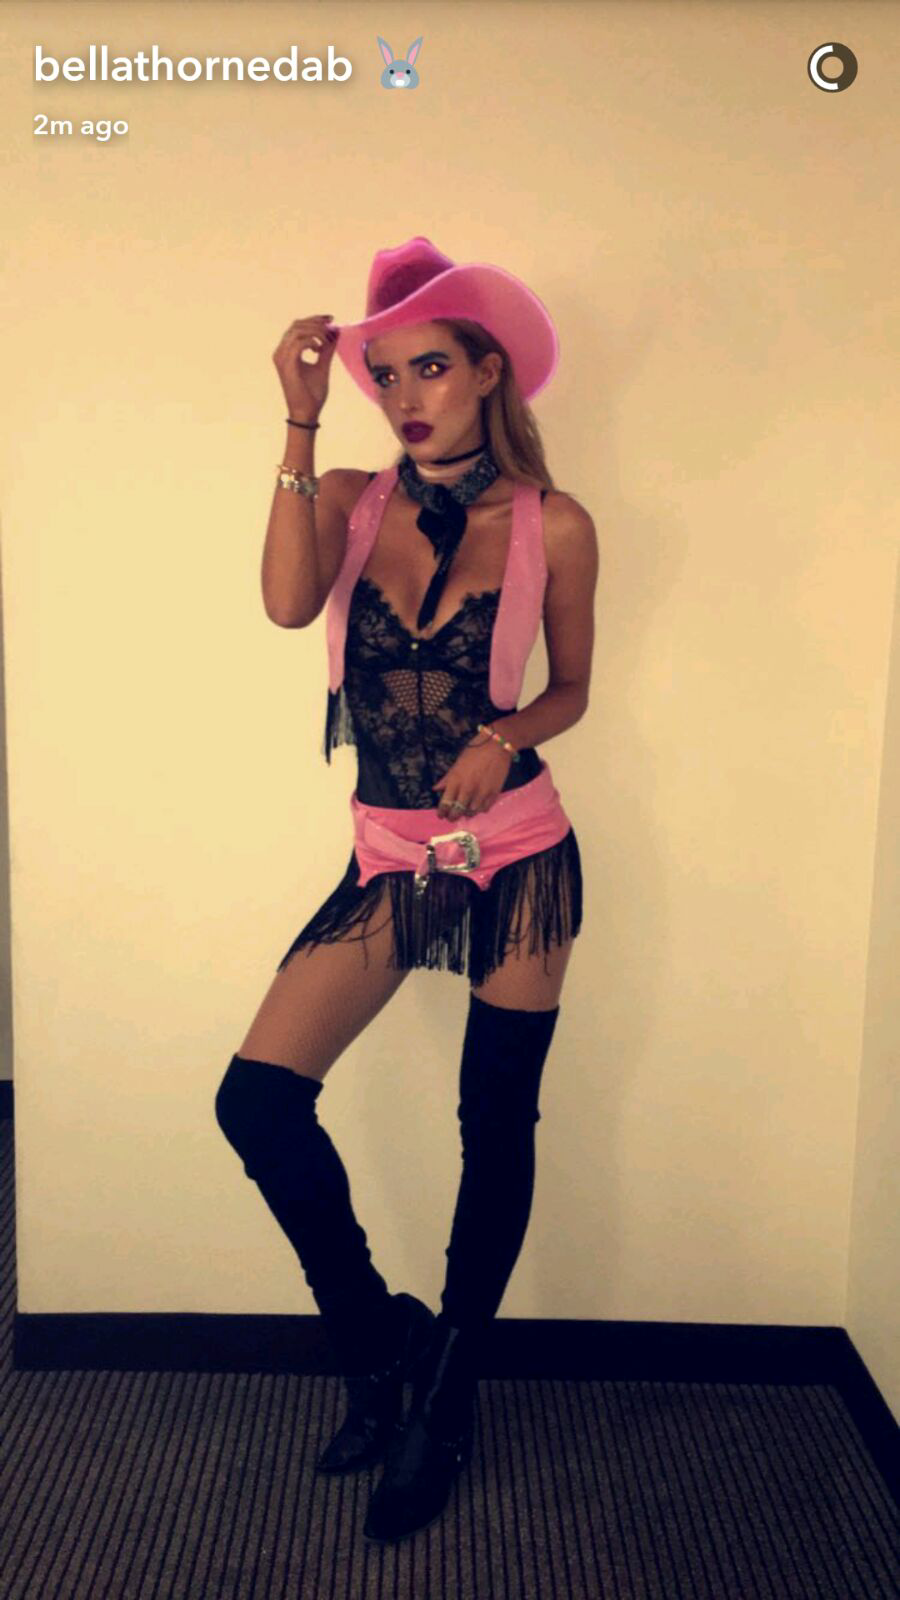 1girl bella_thorne celebrity choker cleavage clothed dark_hair fake_nails female female_only hat high_heel_boots looking_away non-nude snapchat solo thigh_boots white